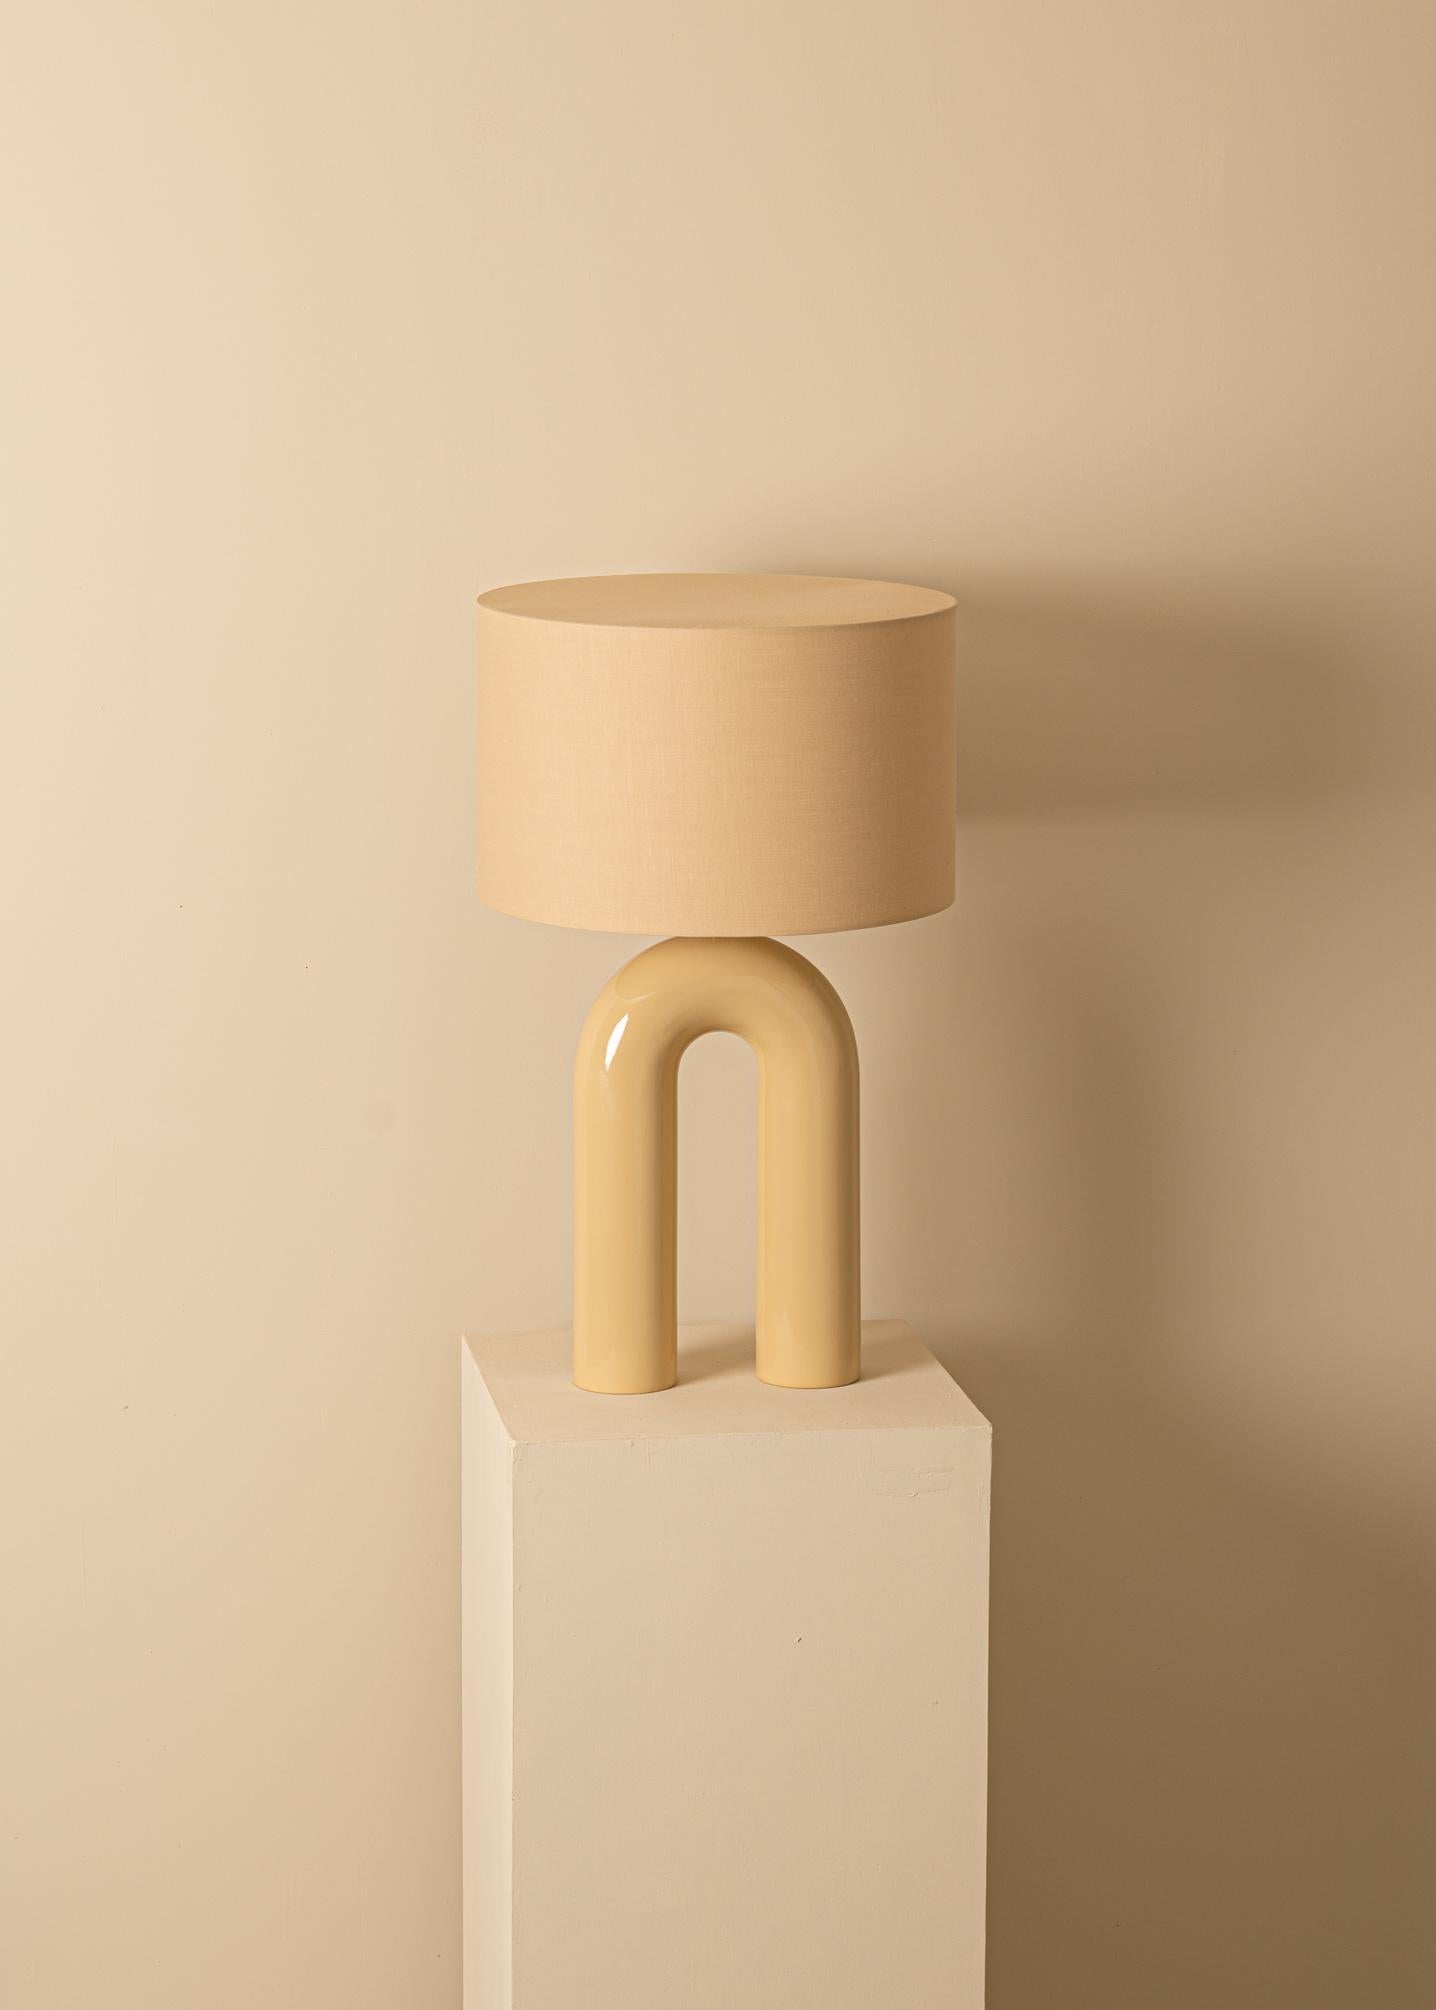 Oat Ceramic Arko Table Lamp by Simone & Marcel
Dimensions: Ø 40 x H 67 cm.
Materials: Cotton lampshade and ceramic.

Also available in different marbles and ceramics. Custom options available on request. Please contact us. 

All our lamps can be